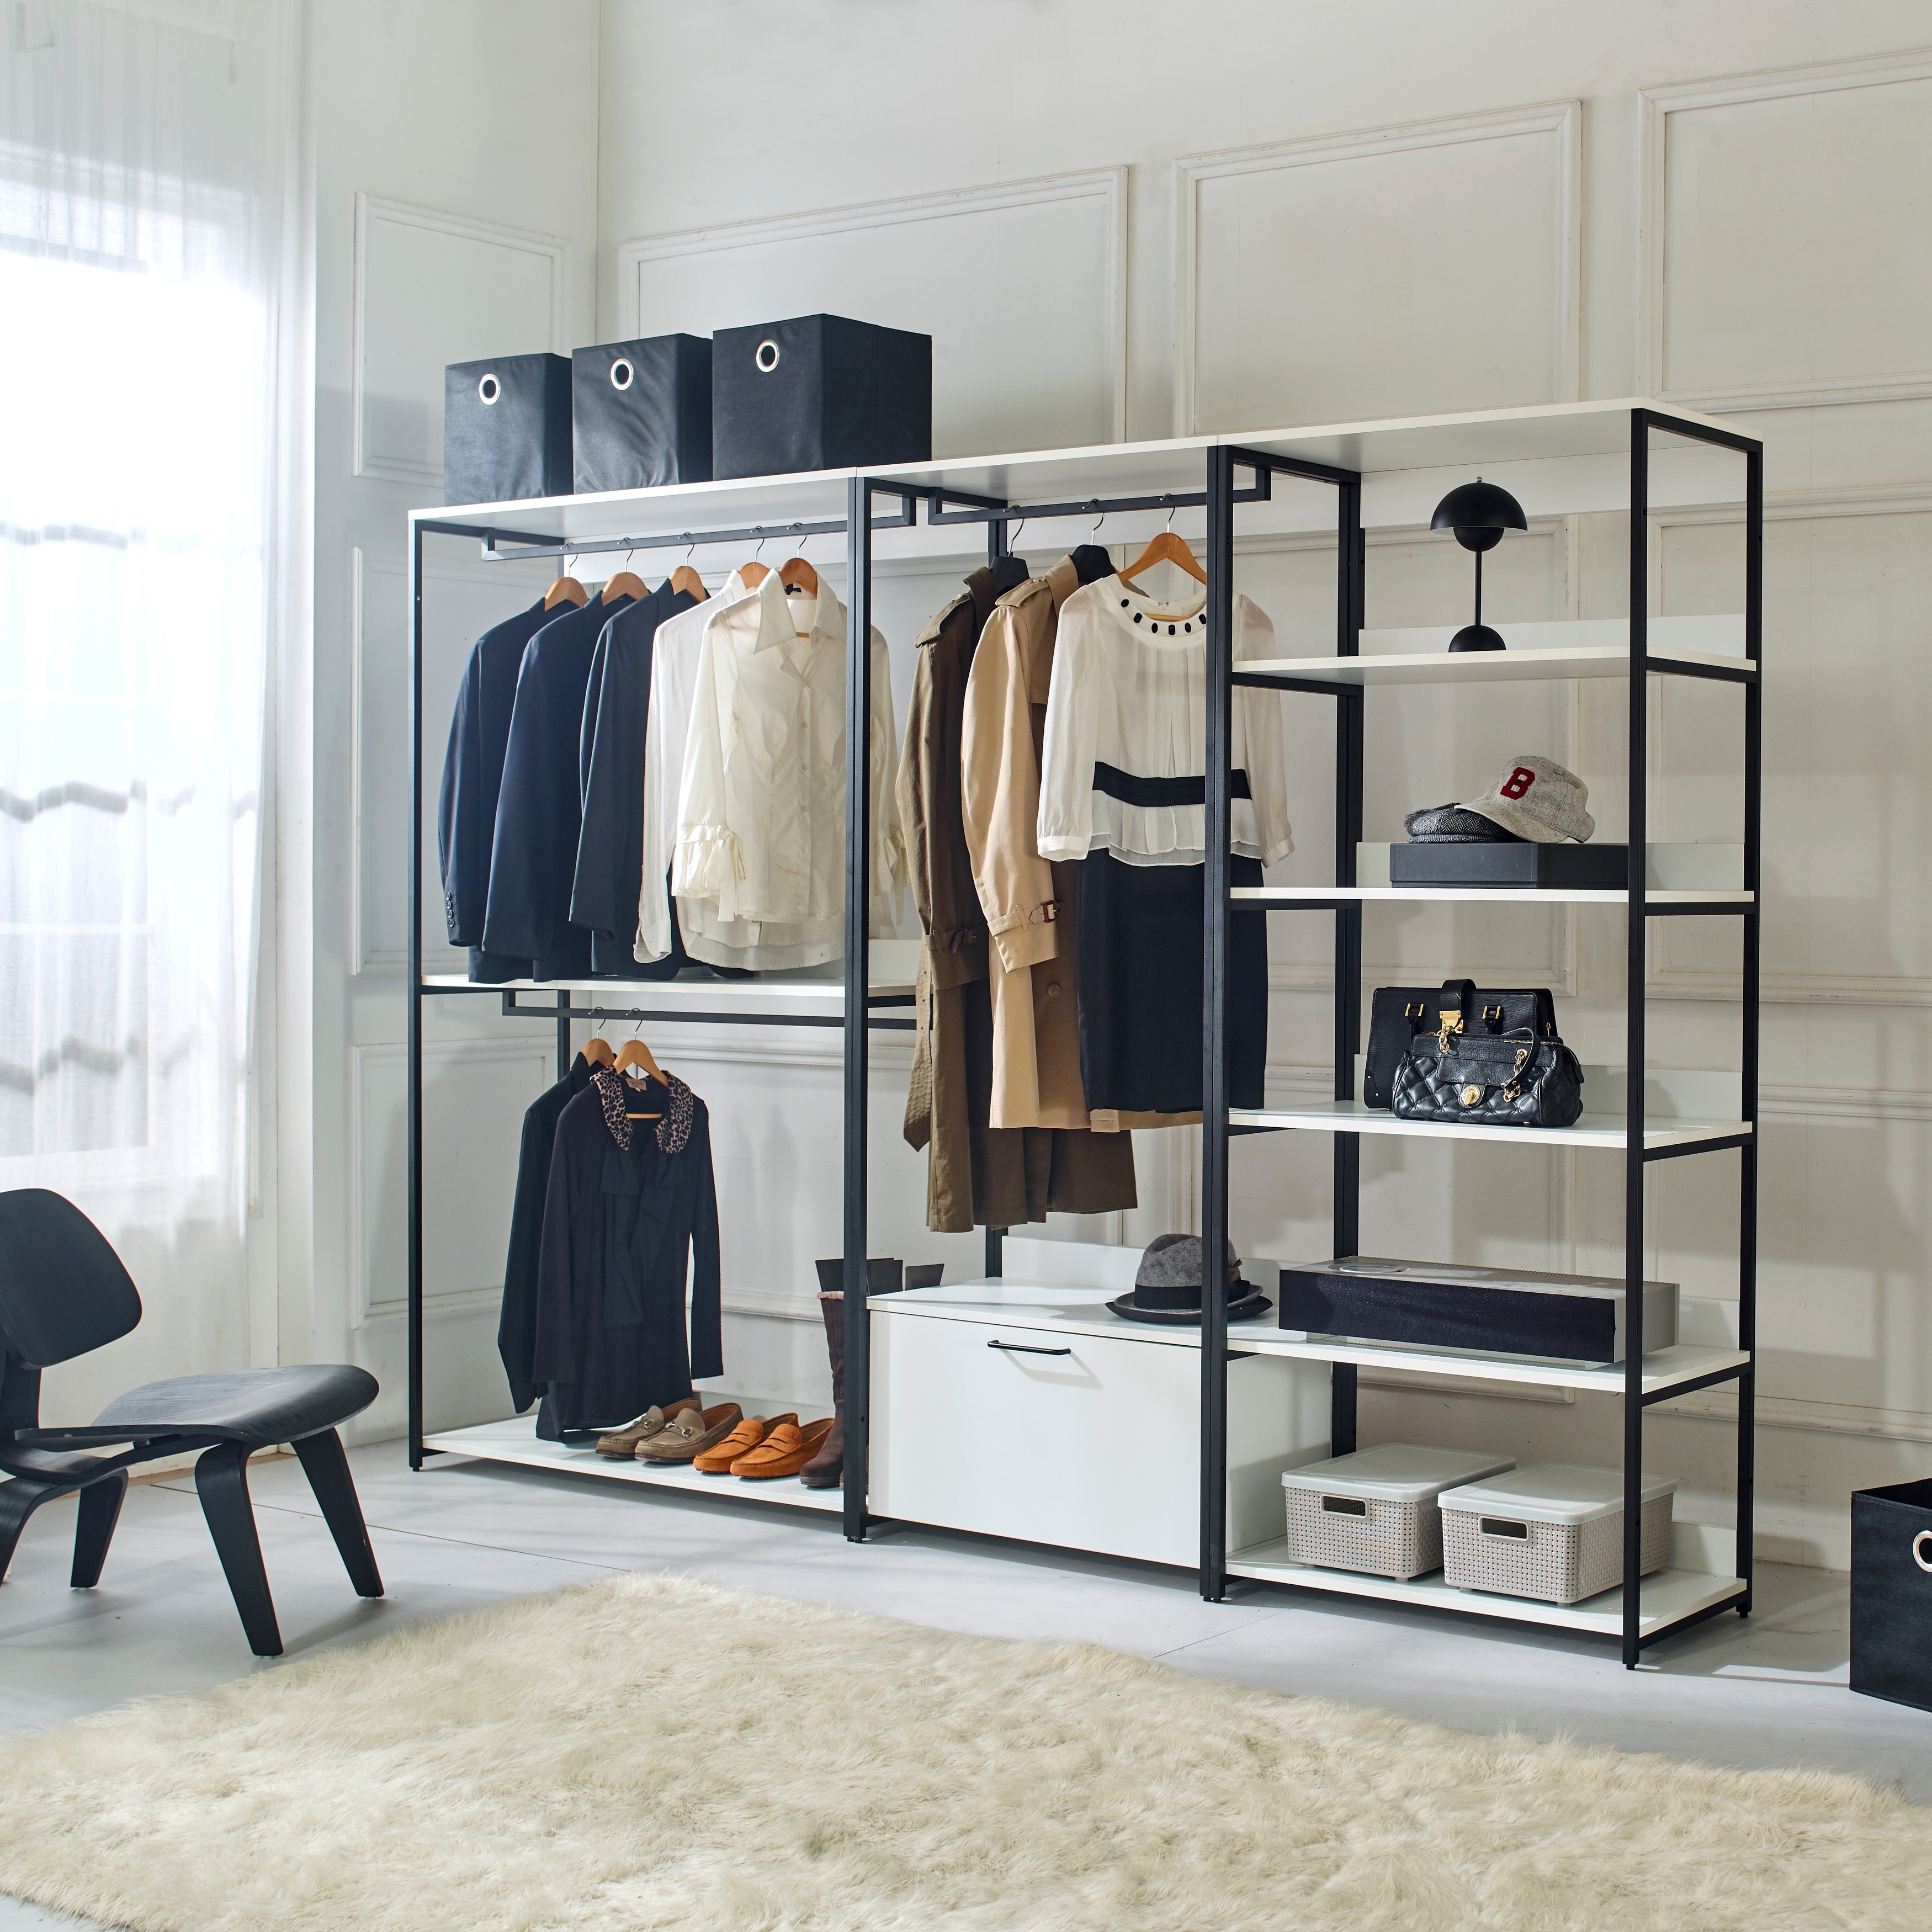 https://ak1.ostkcdn.com/images/products/is/images/direct/c4f2f9d60d8dfa95274a9cd995ce16753867db46/Large-Armoire-Closet-System-with-Drawer-%26-Hanging-Rod-%26-Shoe-Cabinet.jpg